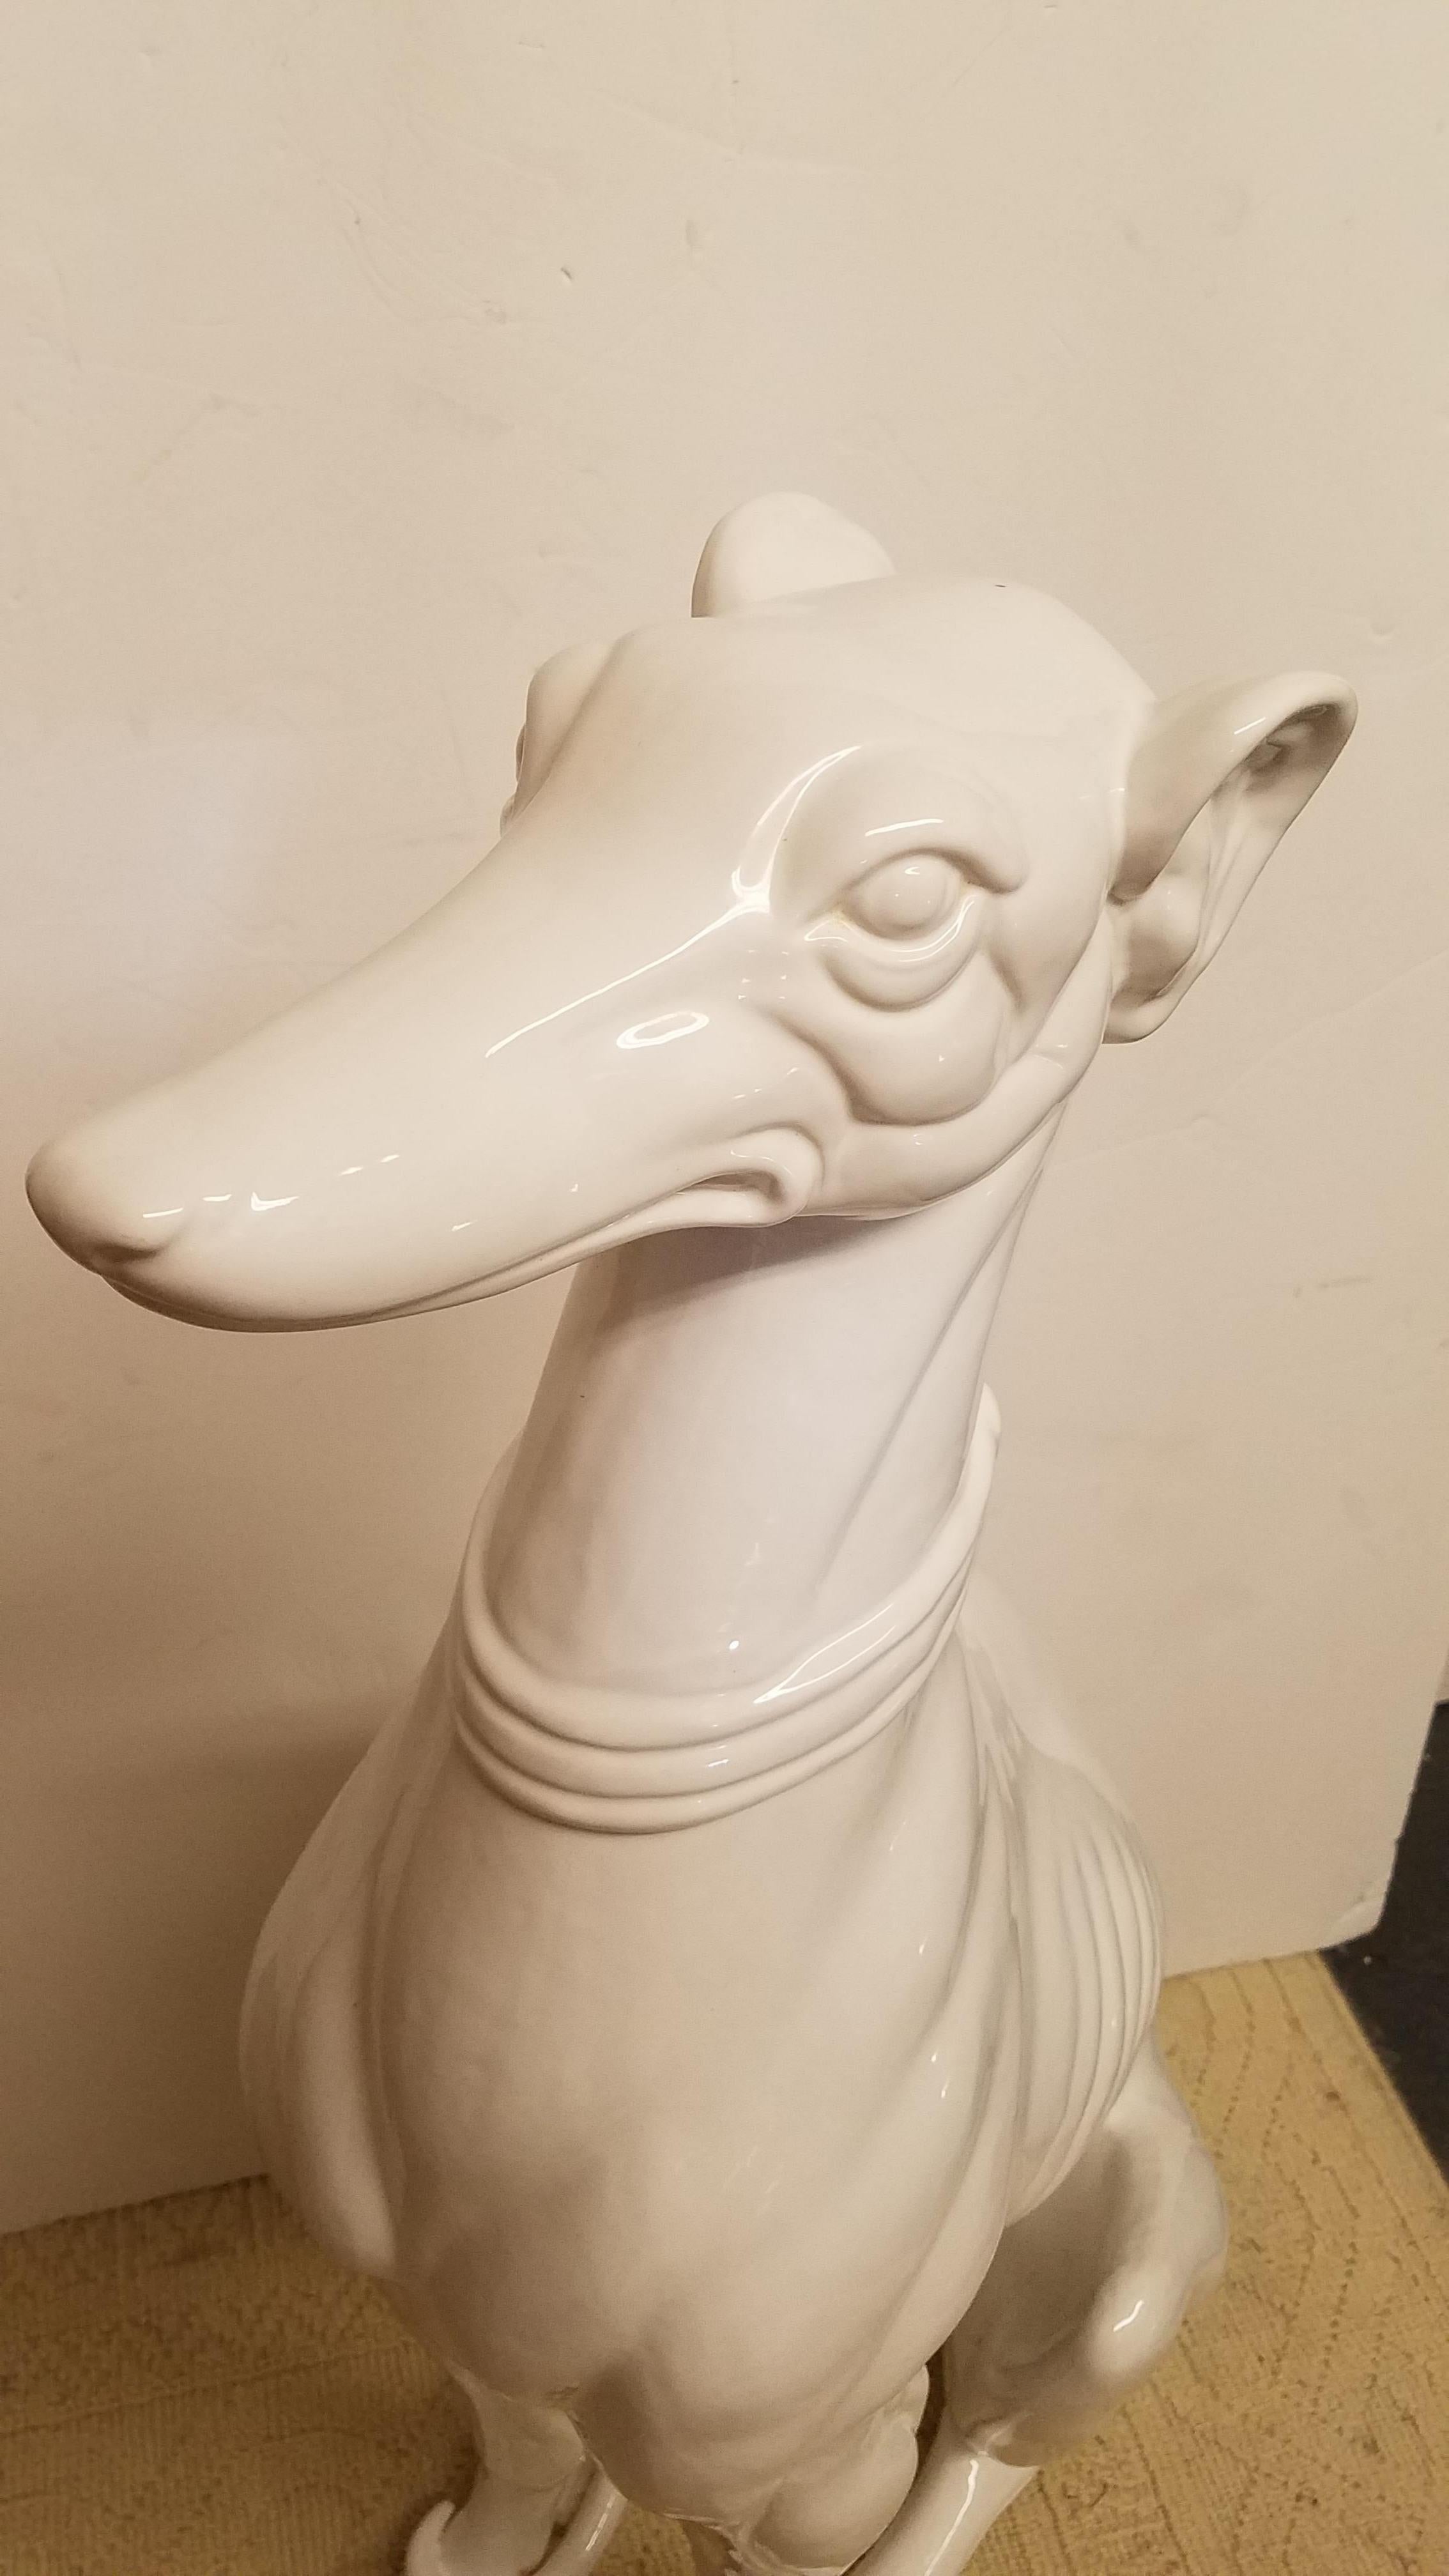 Chic Mid-Century Modern Italian statue of a Greyhound. The shapely figure with a Blanc de Chine glaze standing 38 inches tall. Italy circa 1960s.